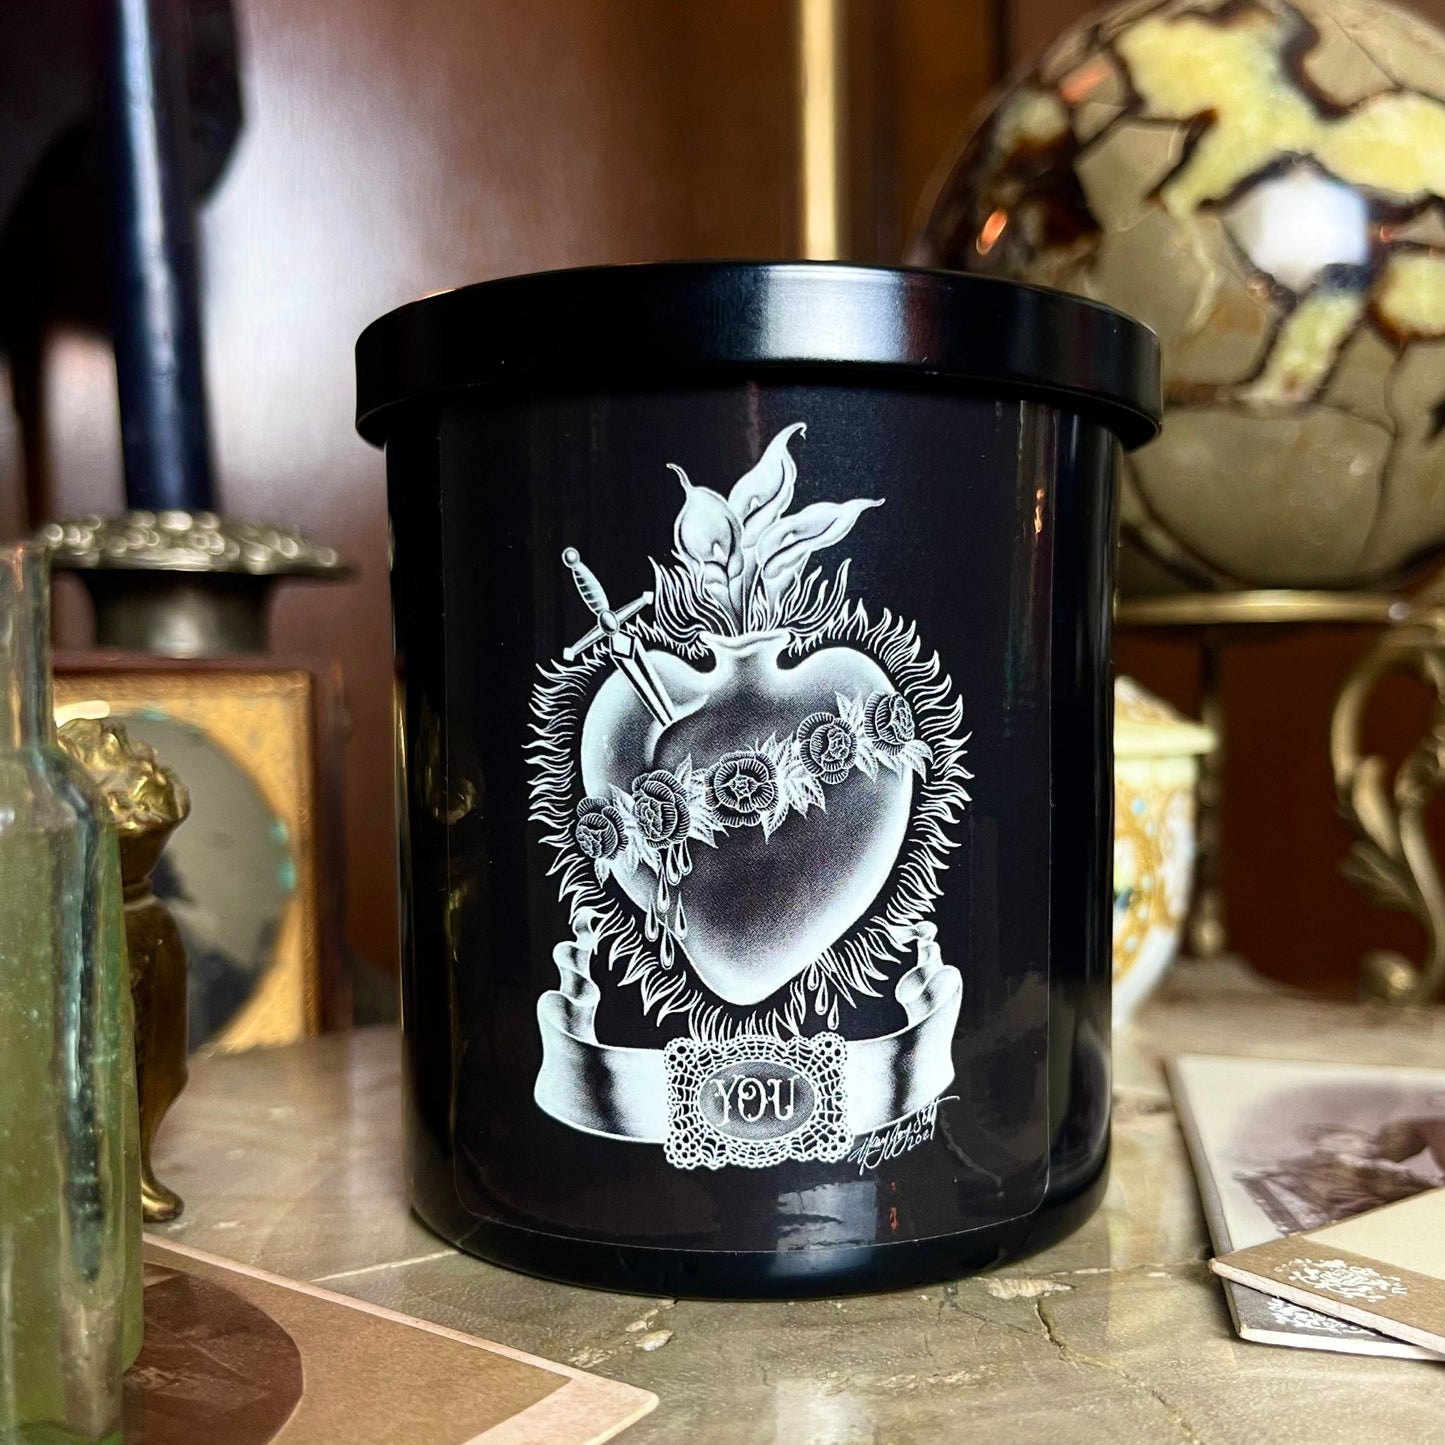 YOU Immaculate Heart Black Candle LTD Black Vanilla Rose - Loved To Death